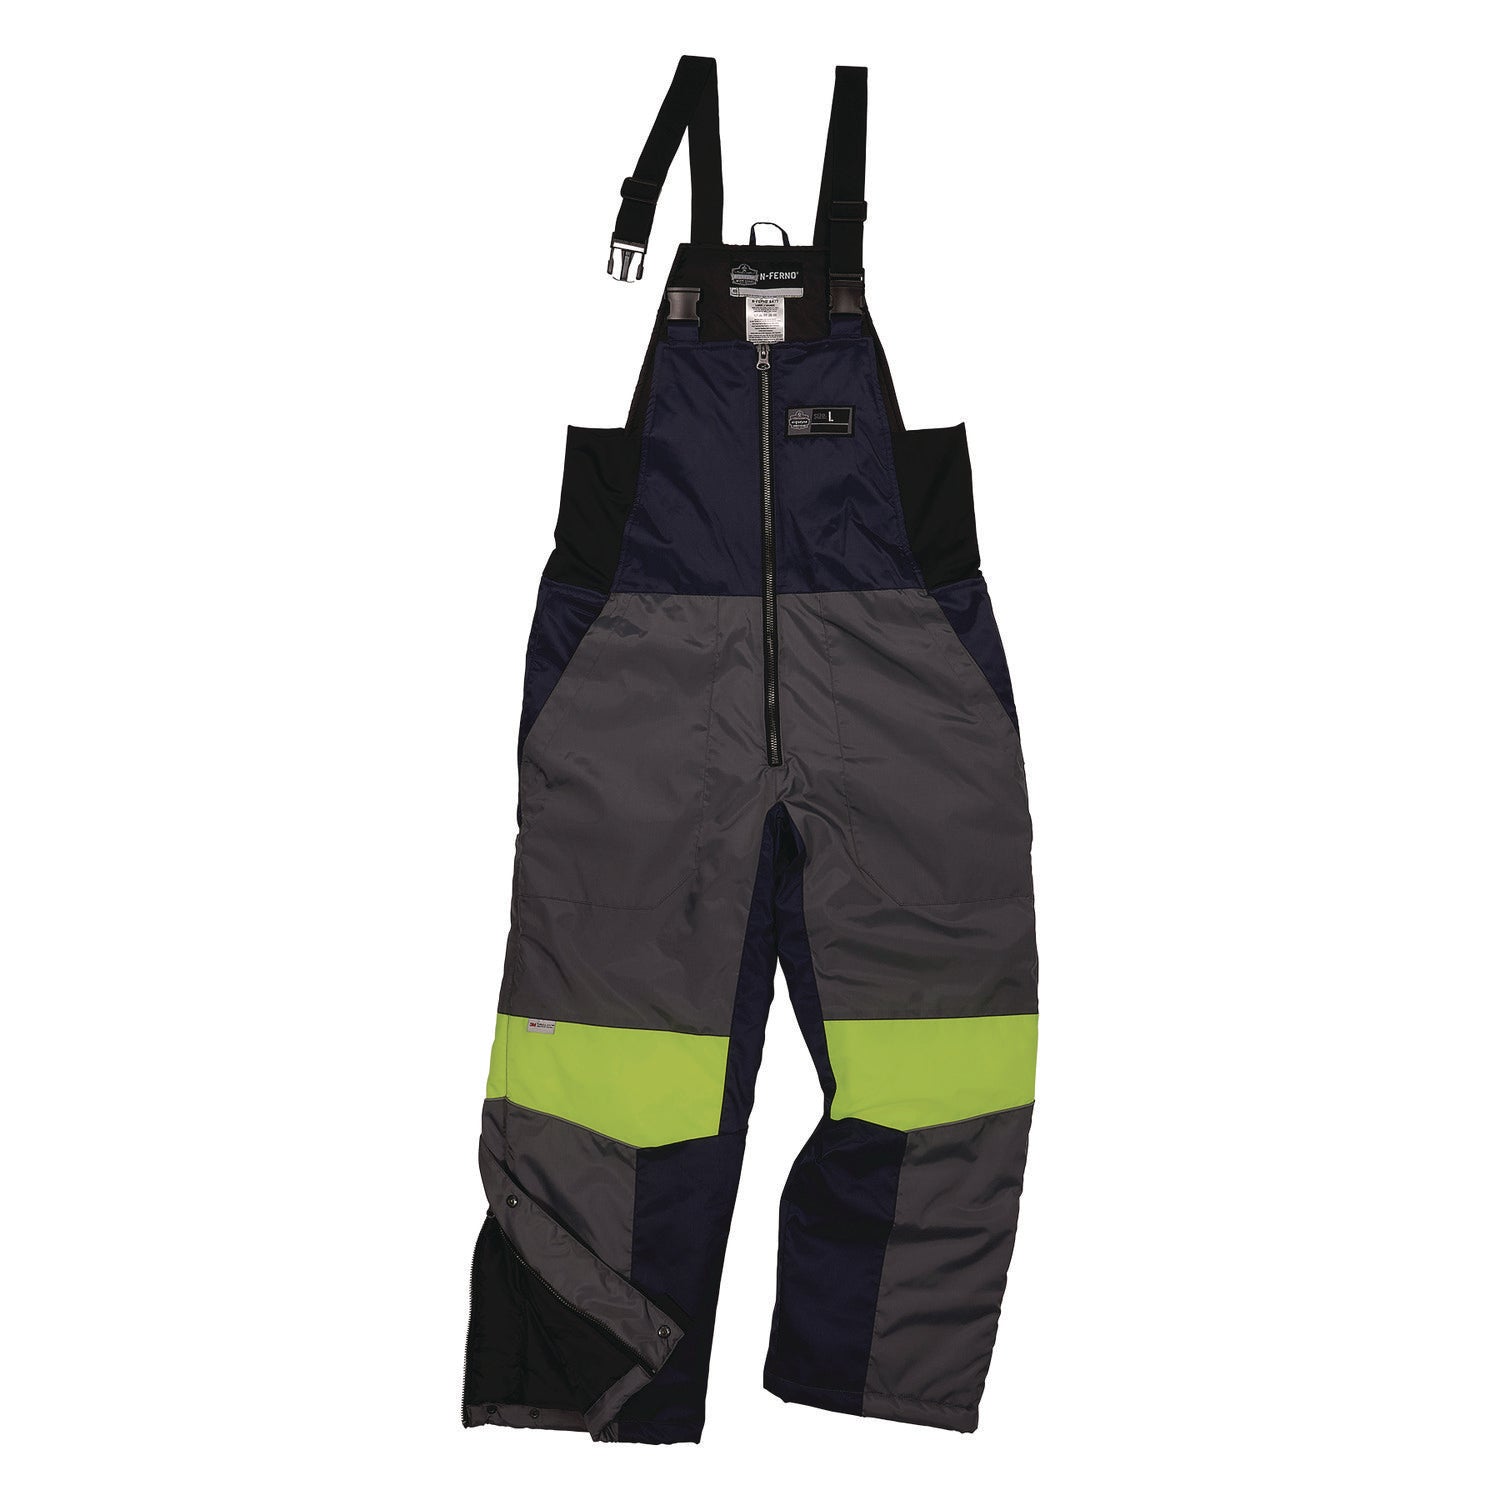 n-ferno-6477-insulated-cooler-bib-overall-x-large-navy-ships-in-1-3-business-days_ego41265 - 1